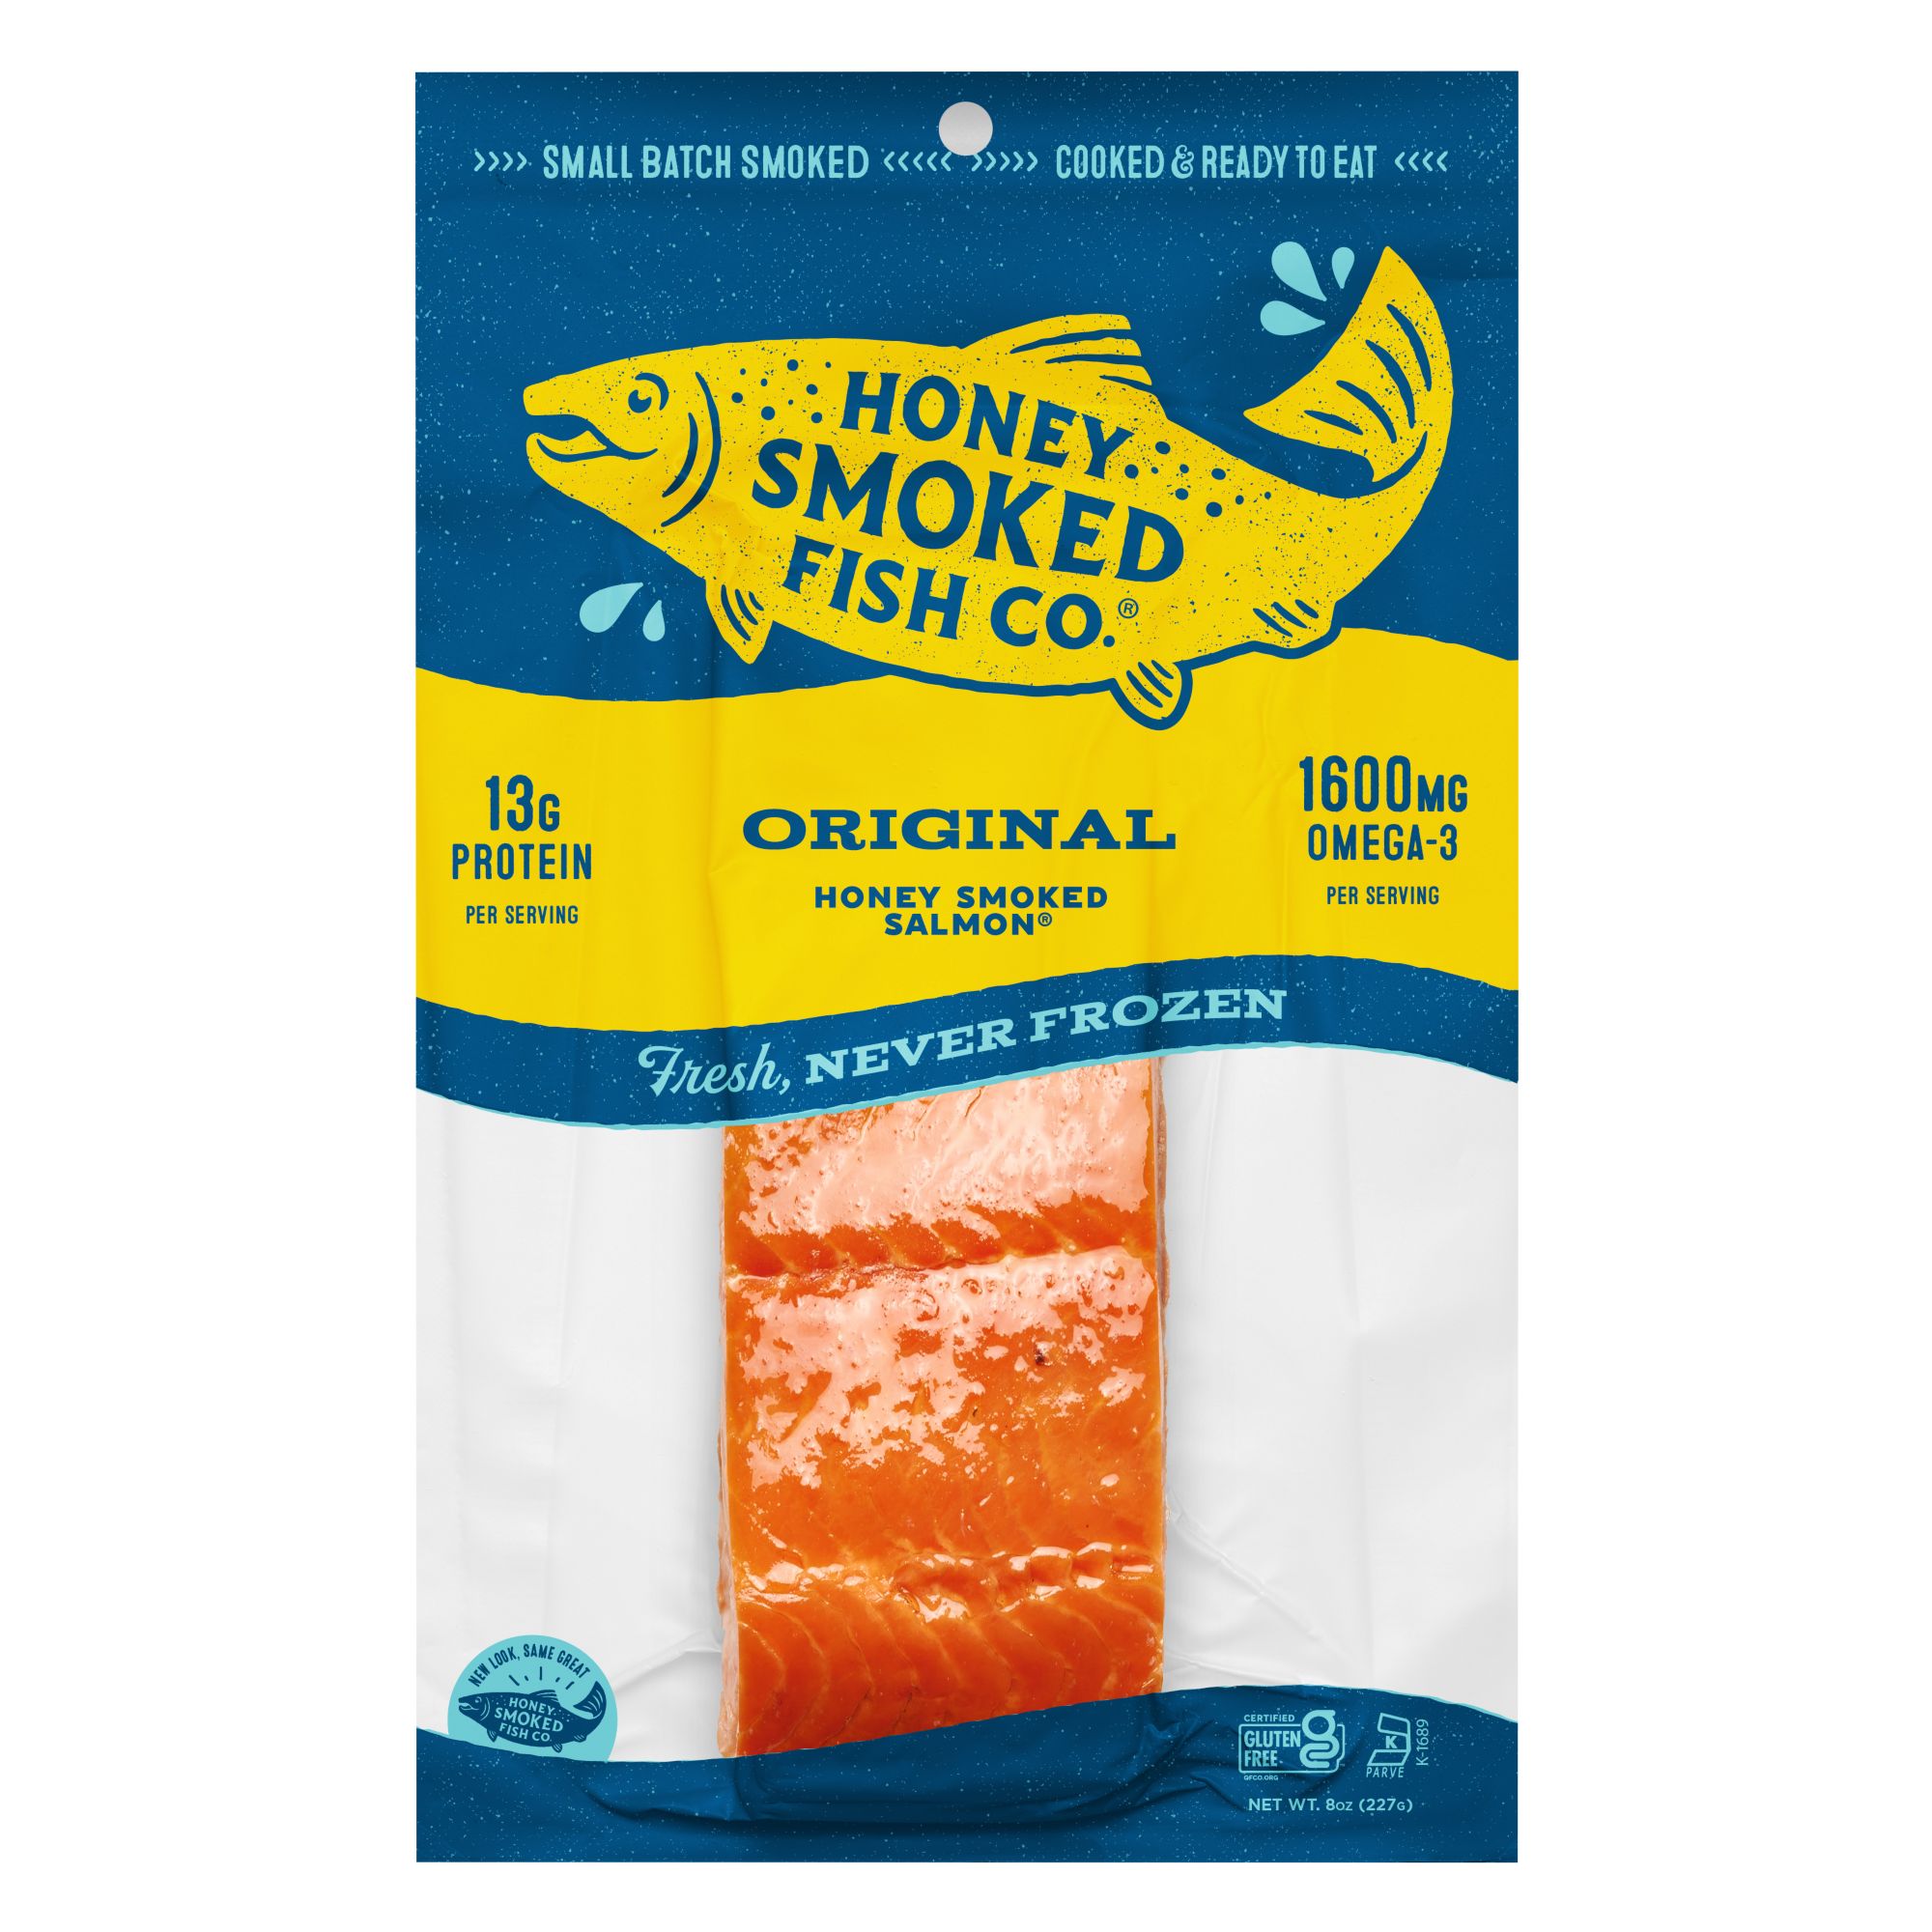  HOMESTYLE HERRING by Acme Smoked Fish (Pack of 3